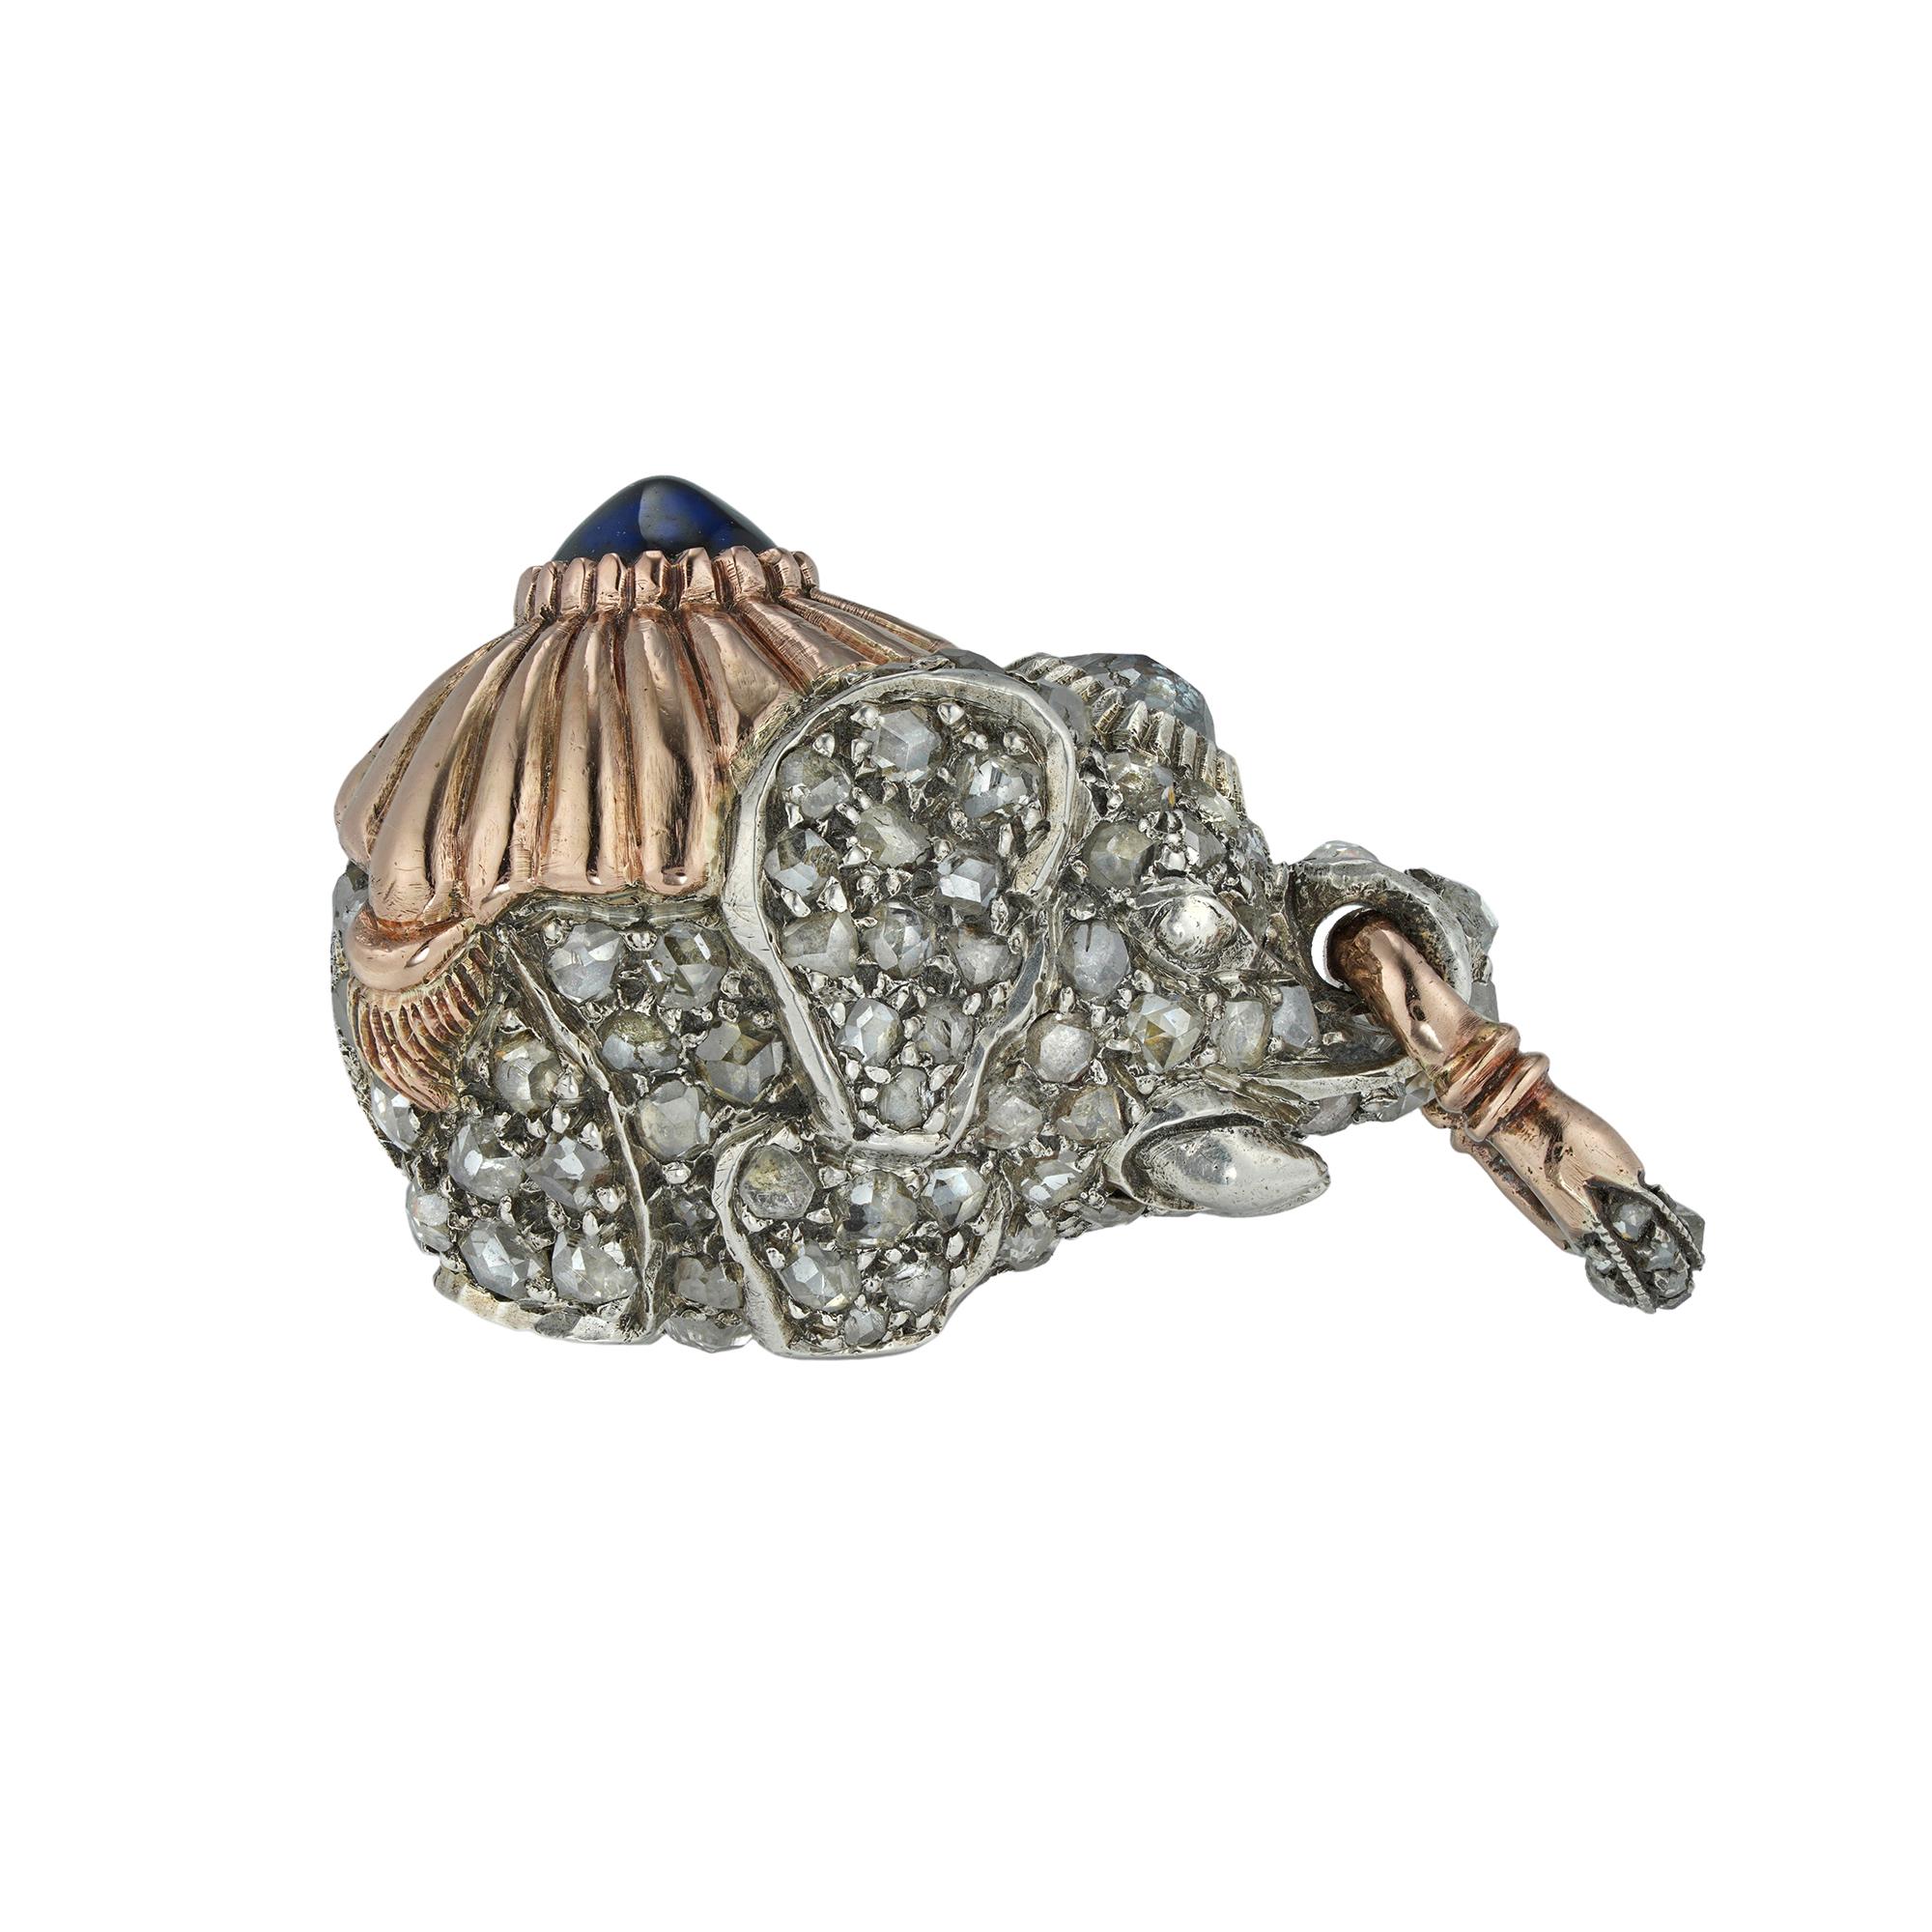 A Fabergé diamond set miniature egg pendant in the form of an elephant realistically modelled in standing position with its trunk curving-up, all set throughout with rose-cut diamonds, the back decorated with a rose-gold saddle cloth with tassel